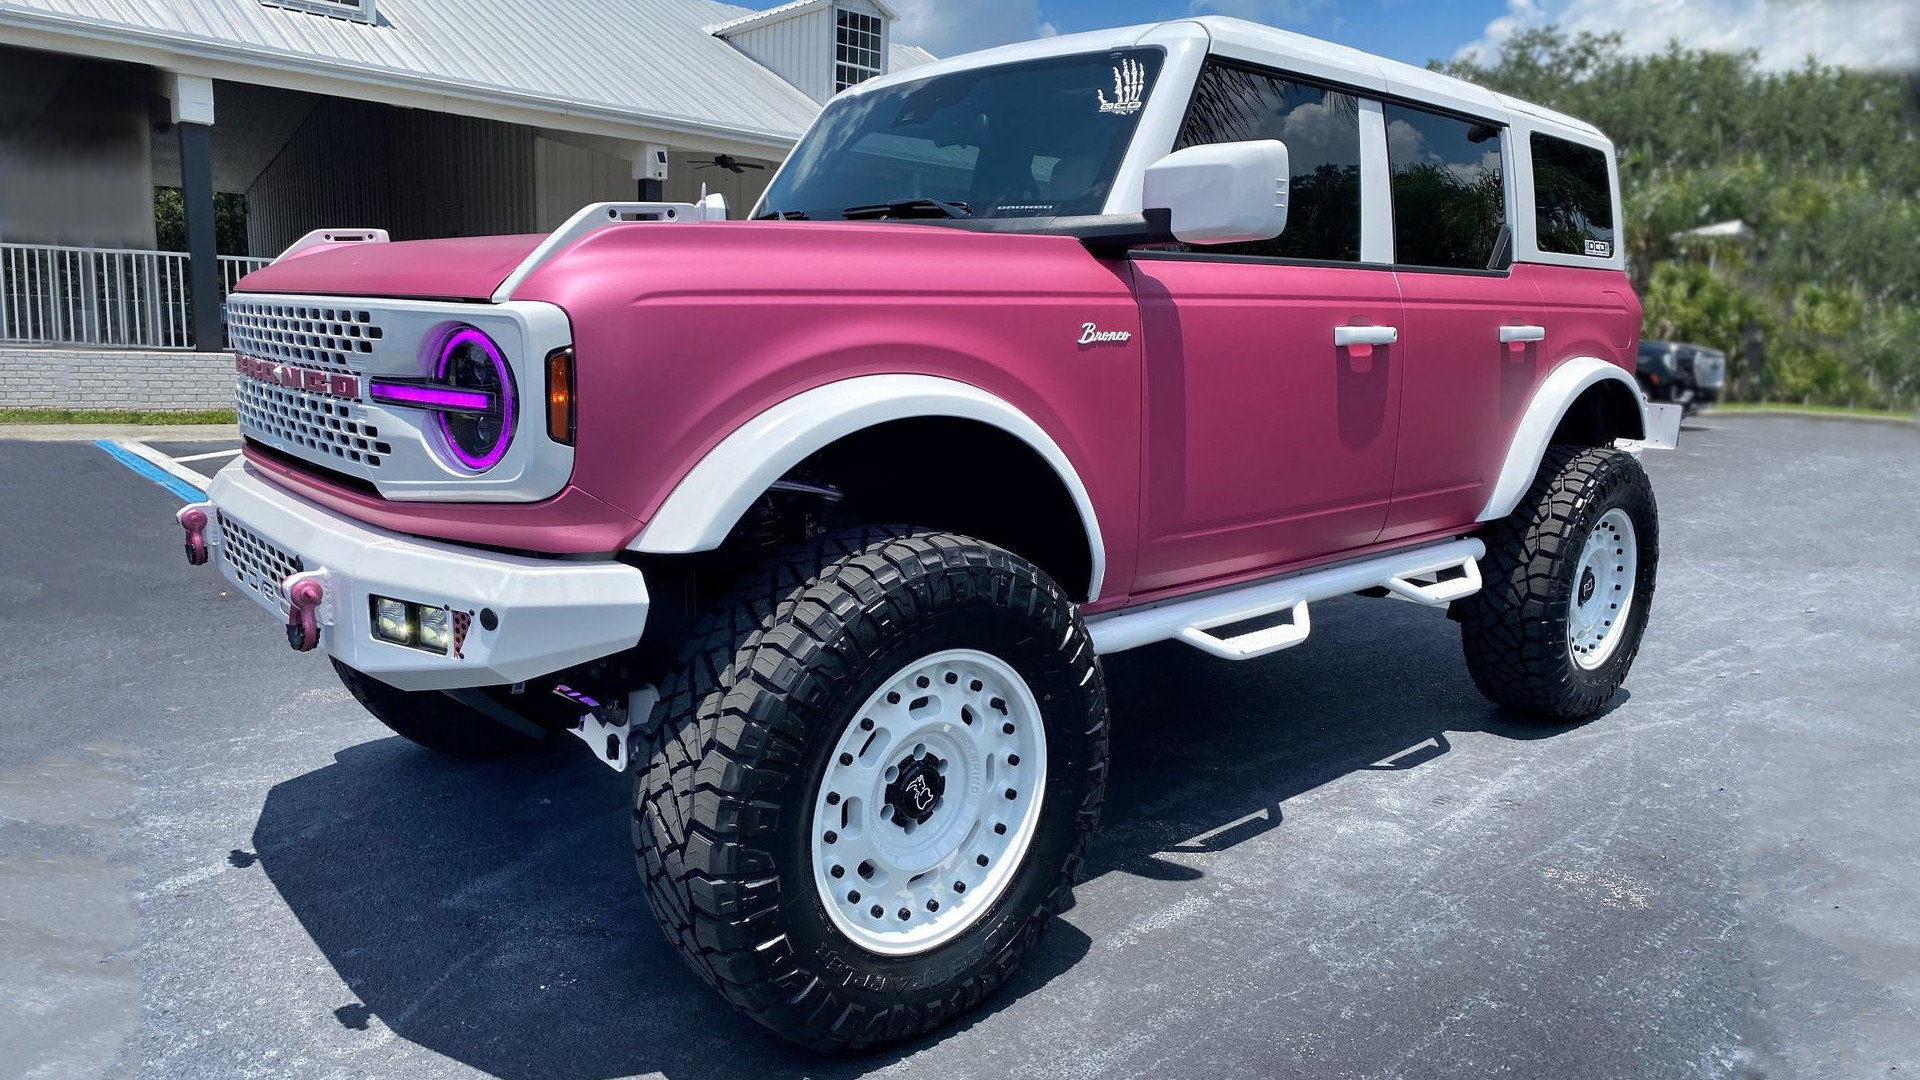 BarbieInspired Ford Bronco Packs a Lot of Pink for 89,890